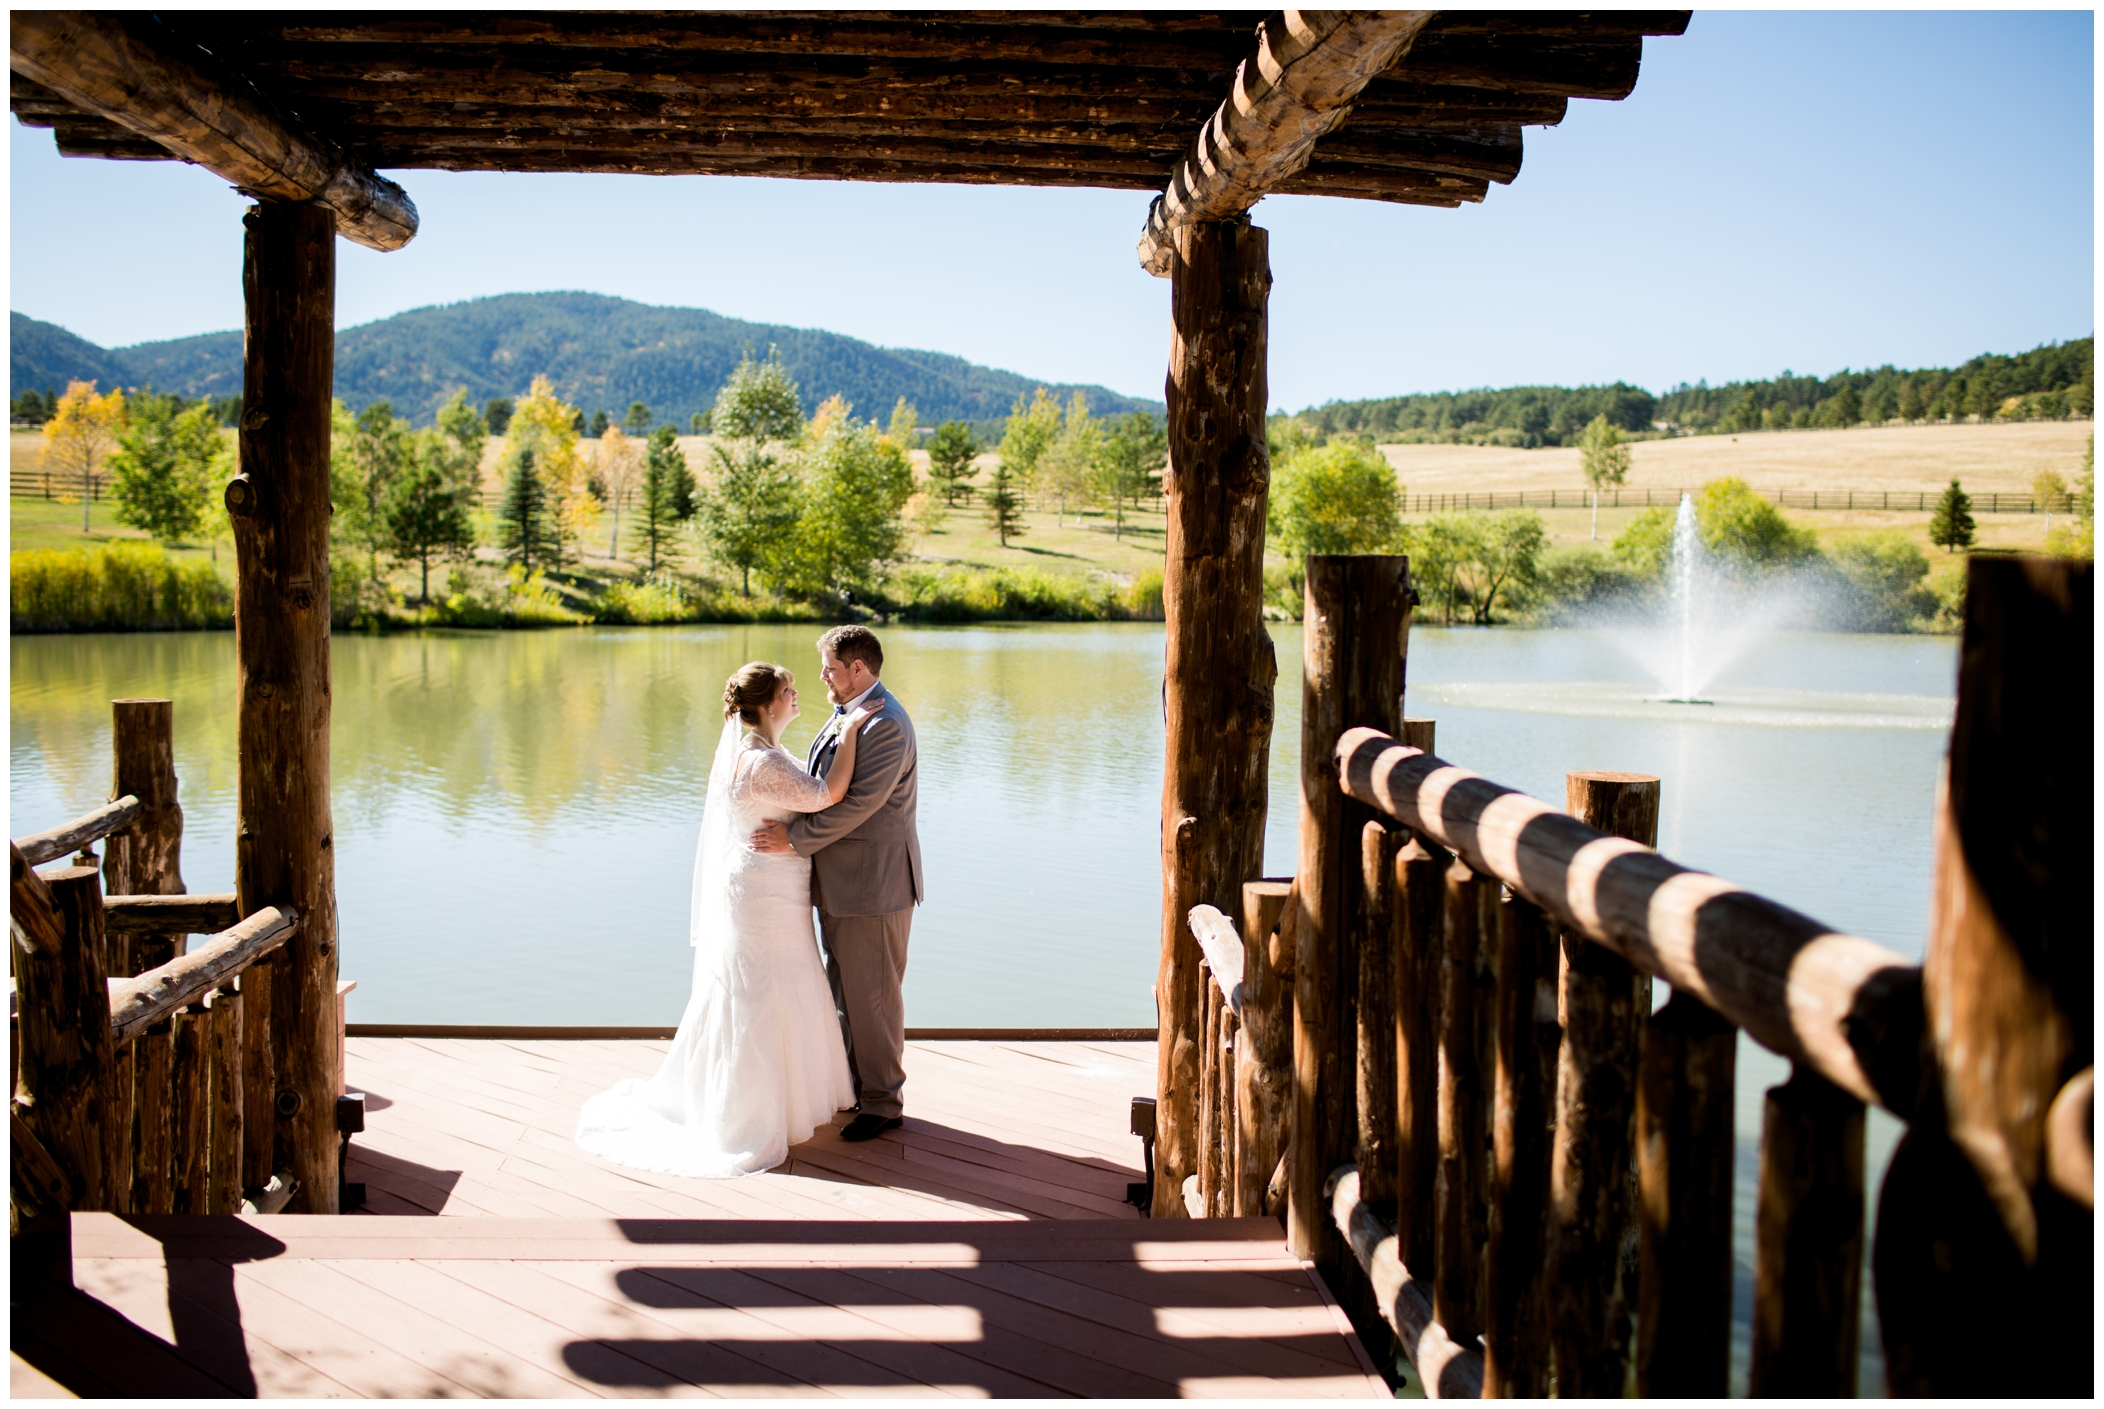 Spruce Mountain Ranch wedding in Larkspur, CO by Colorado photographer Plum Pretty Photography